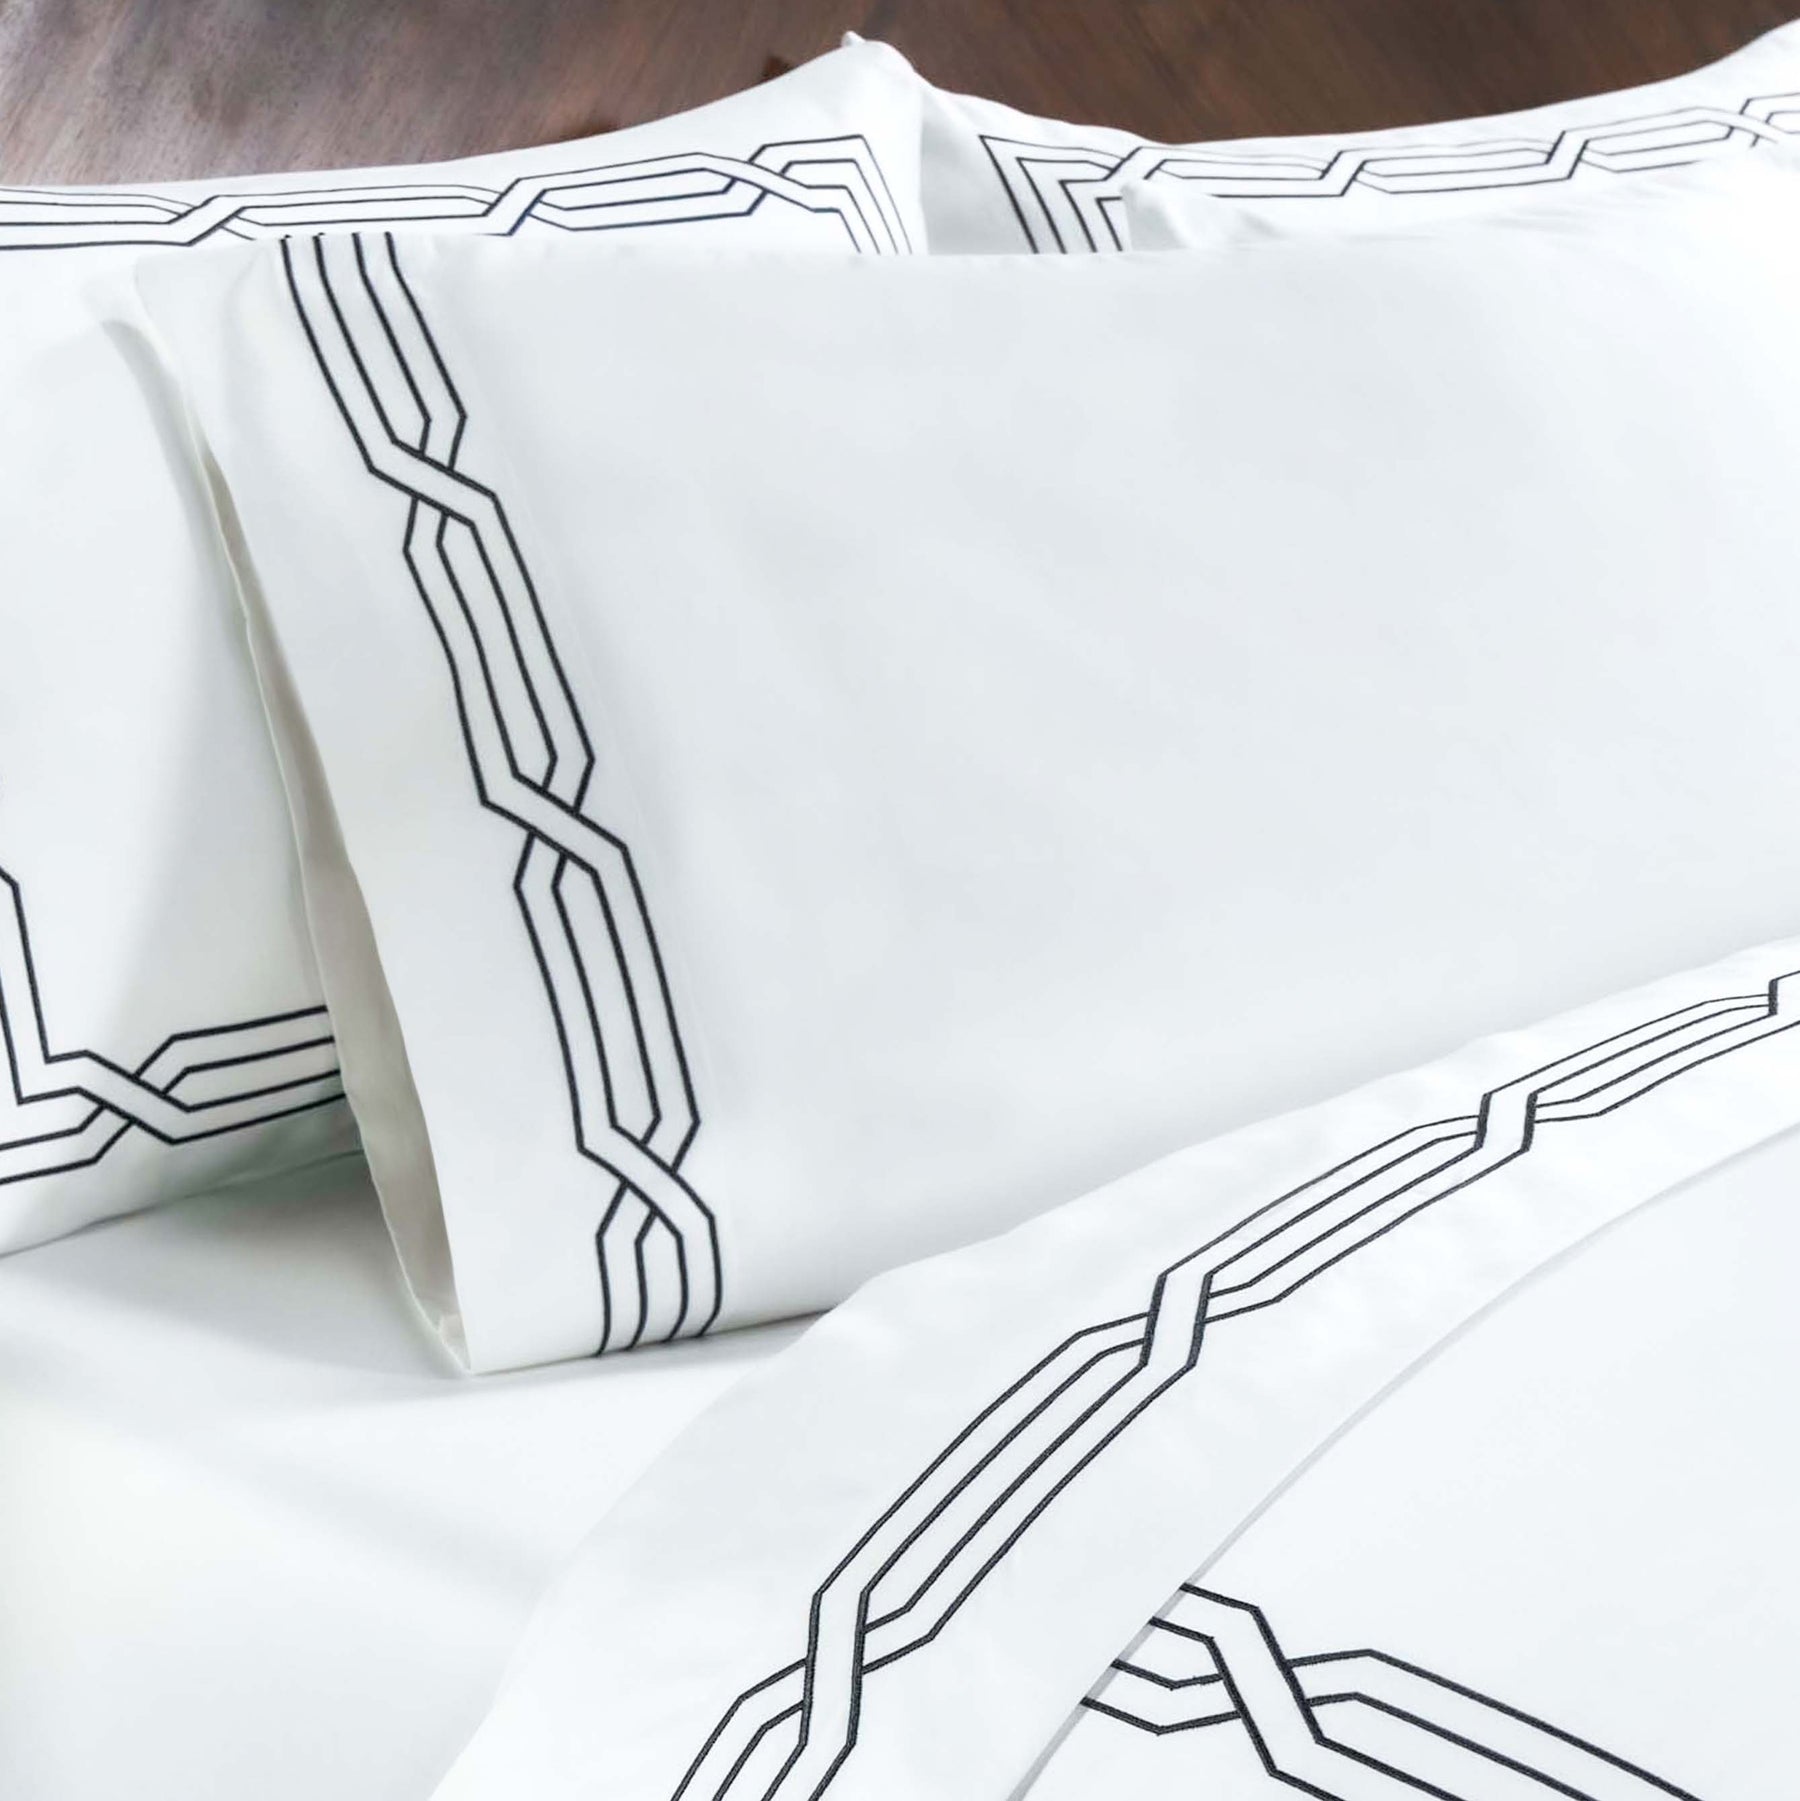 Superior Egyptian Cotton 1200 Thread Count Embroidered Geometric Scroll Bed Sheet Set - White-Charcoal